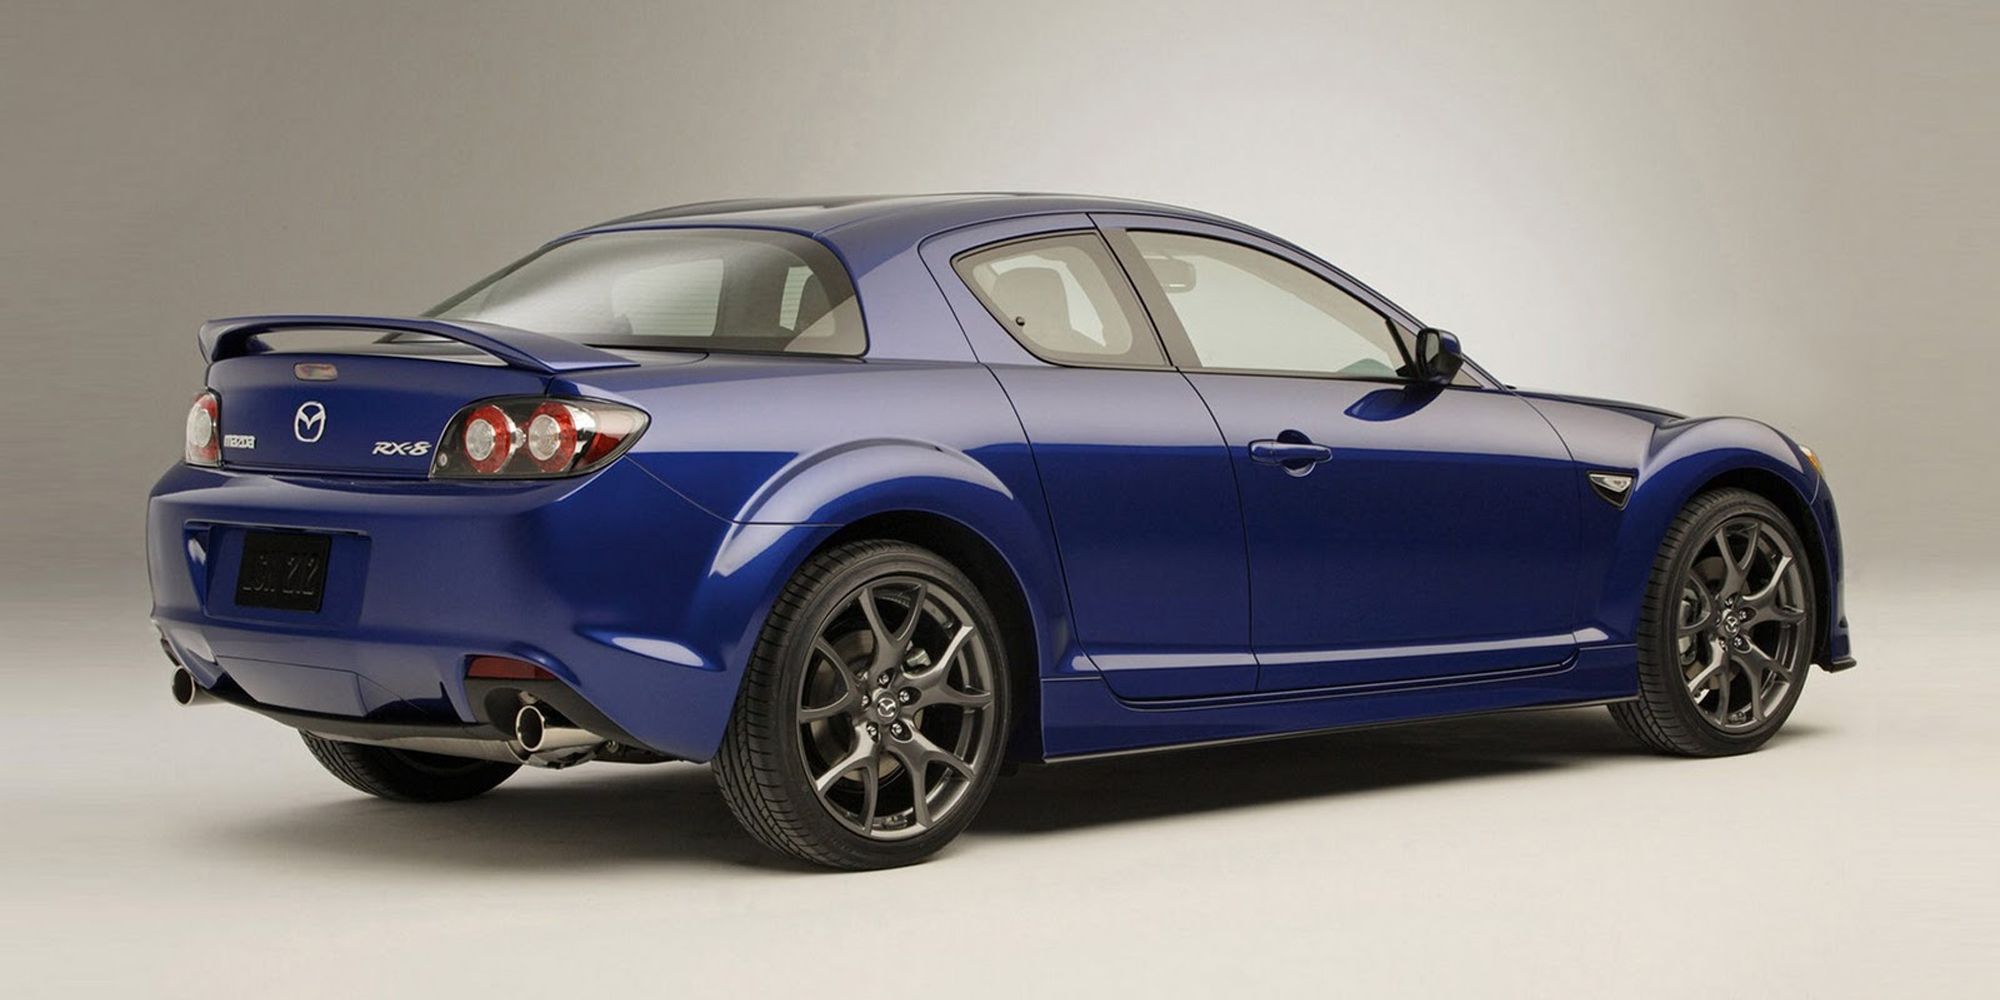 Rear 3/4 view of the Mazda RX8 (Blue)